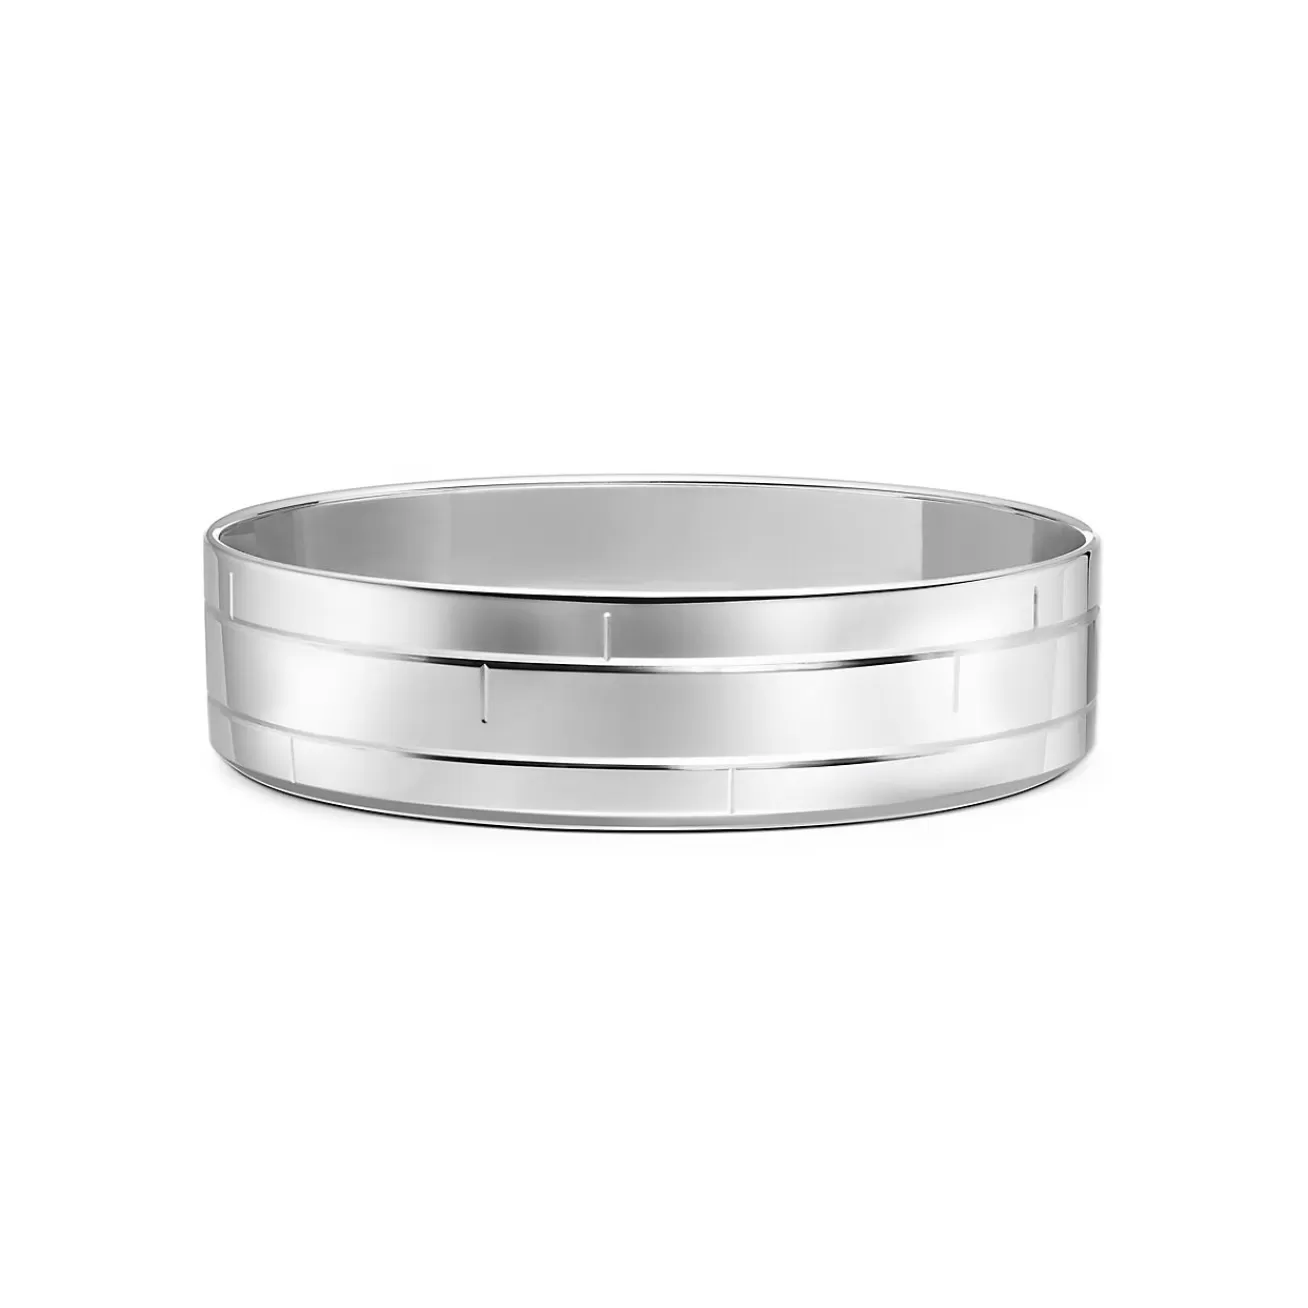 Tiffany & Co. Modern Bamboo Bowl in Sterling Silver | ^ Tableware